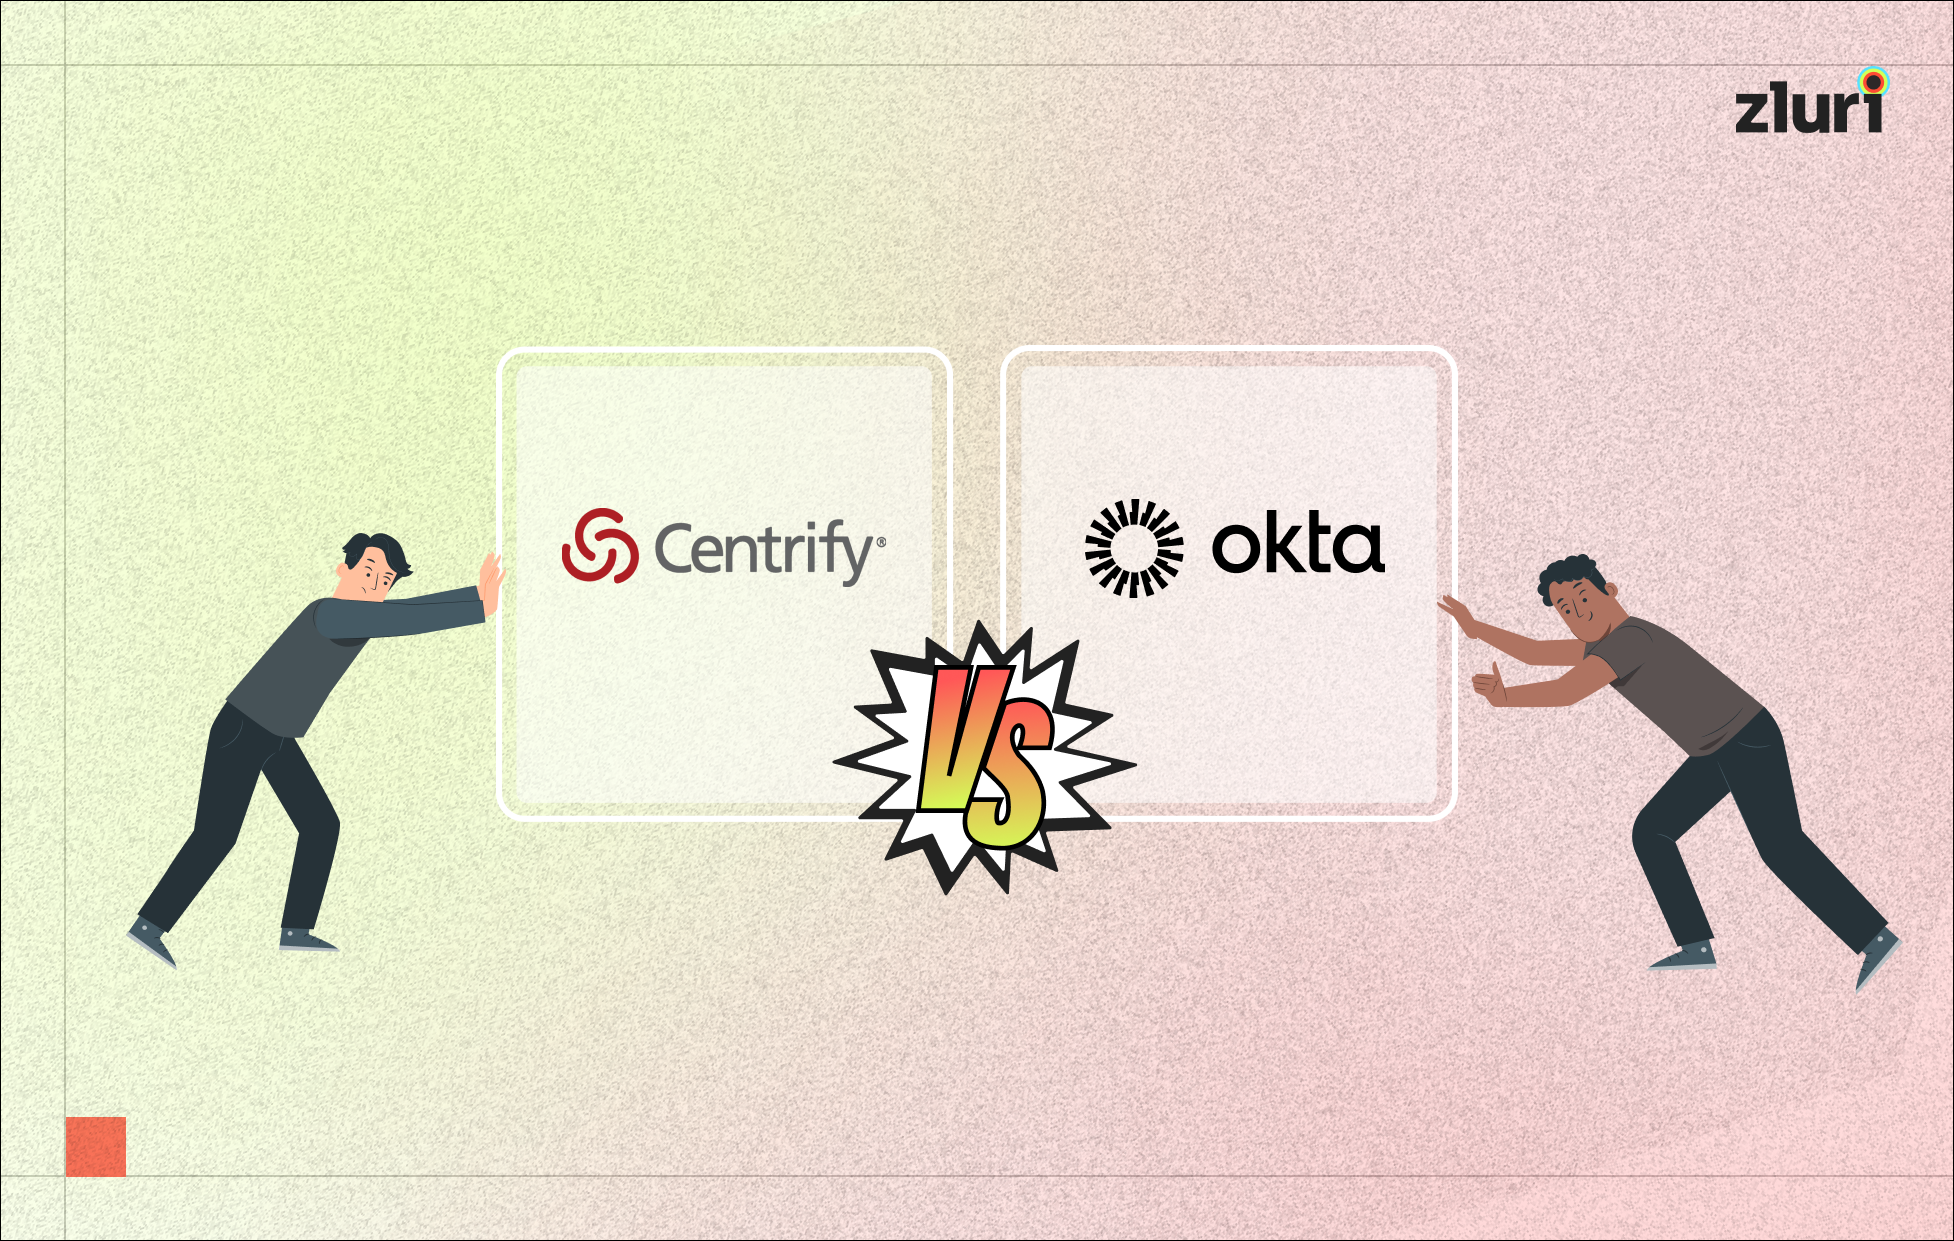 Centrify Vs. Okta: Which ULM Tool To Choose? - Featured Shot